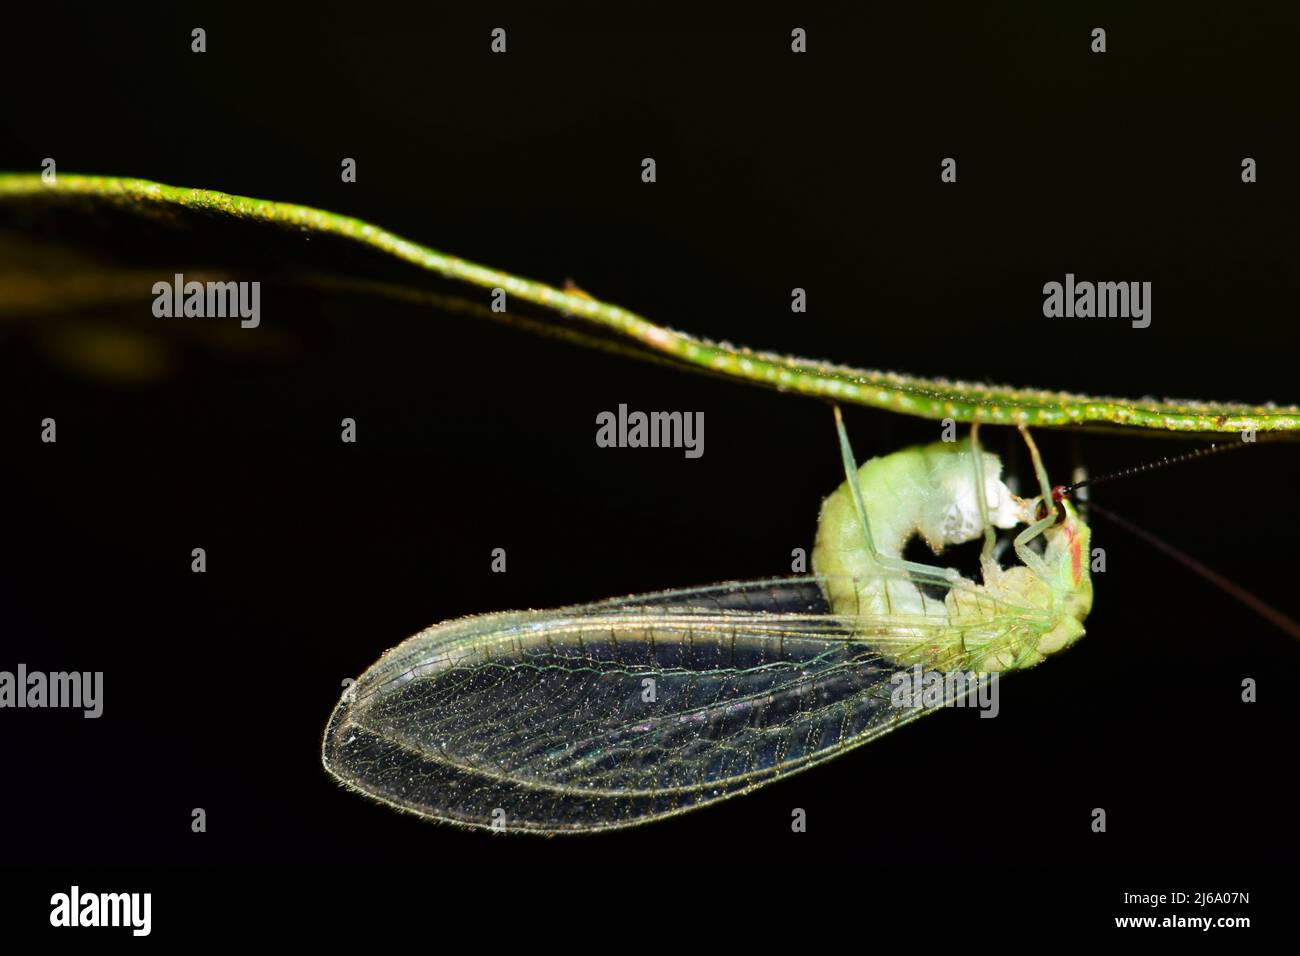 Adult female Green Lacewing secreting sticky liquid from abdomen to attach her eggs when she lays them to a plant stem. Nighttime insect behavior. Stock Photo